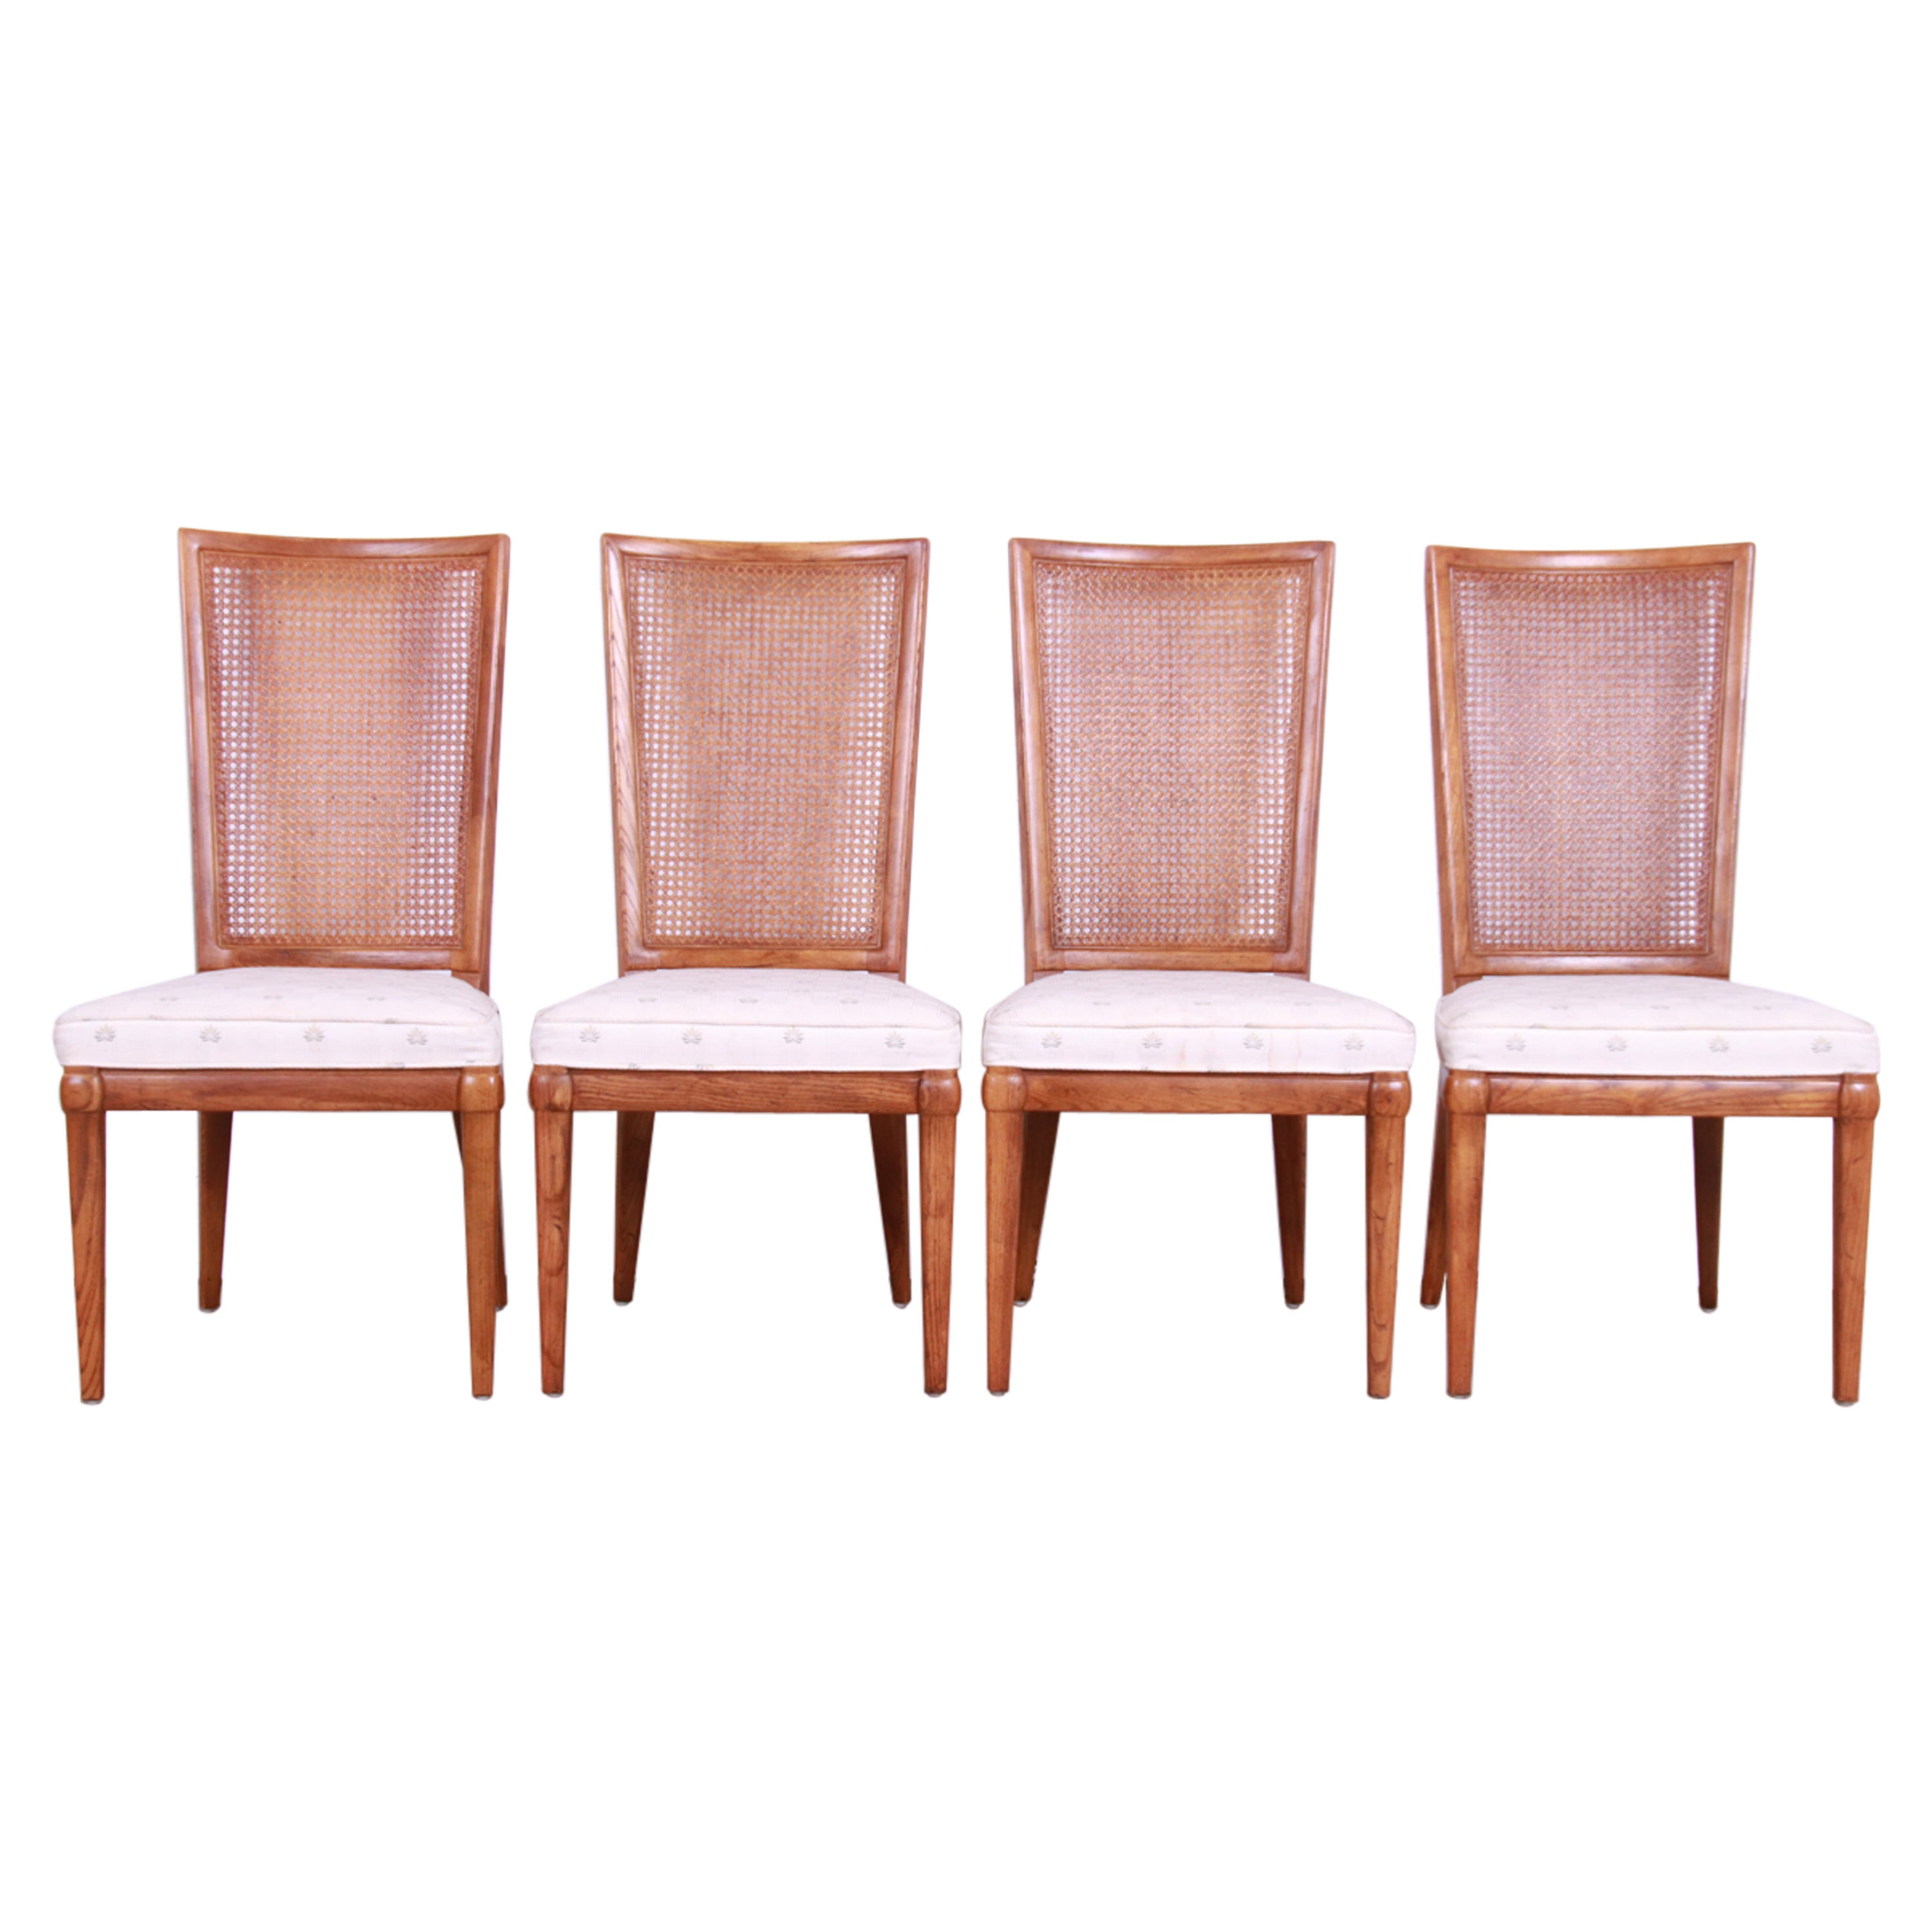 Henredon Mid-Century Modern Oak and Cane Dining Chairs, Set of Four